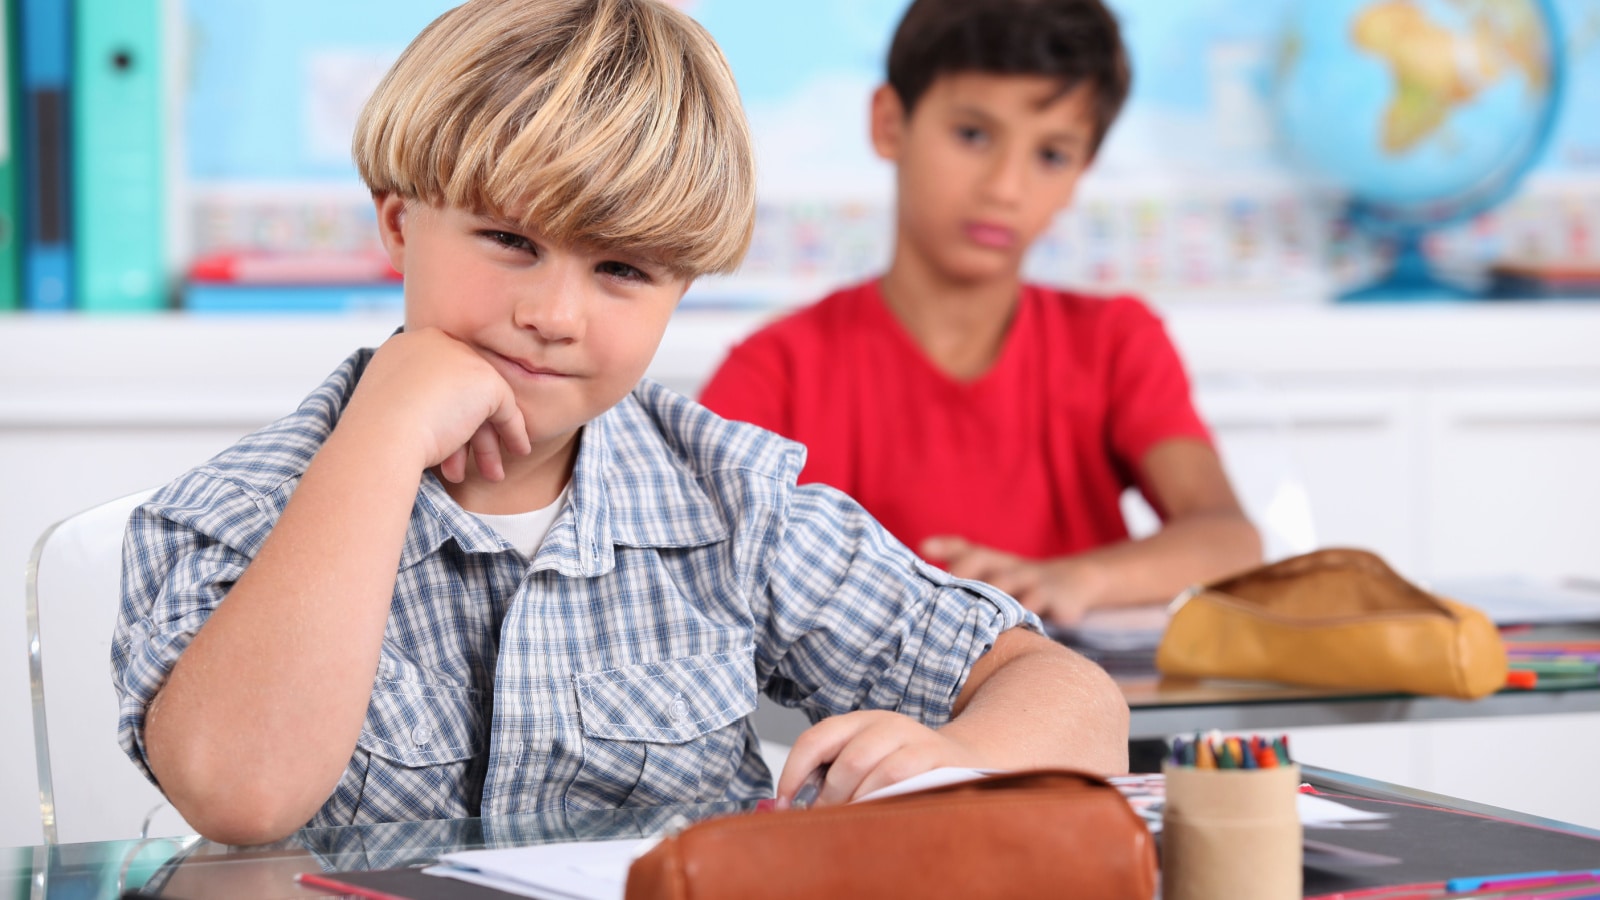 schoolboys seated at desk in classroom with bowl haircut